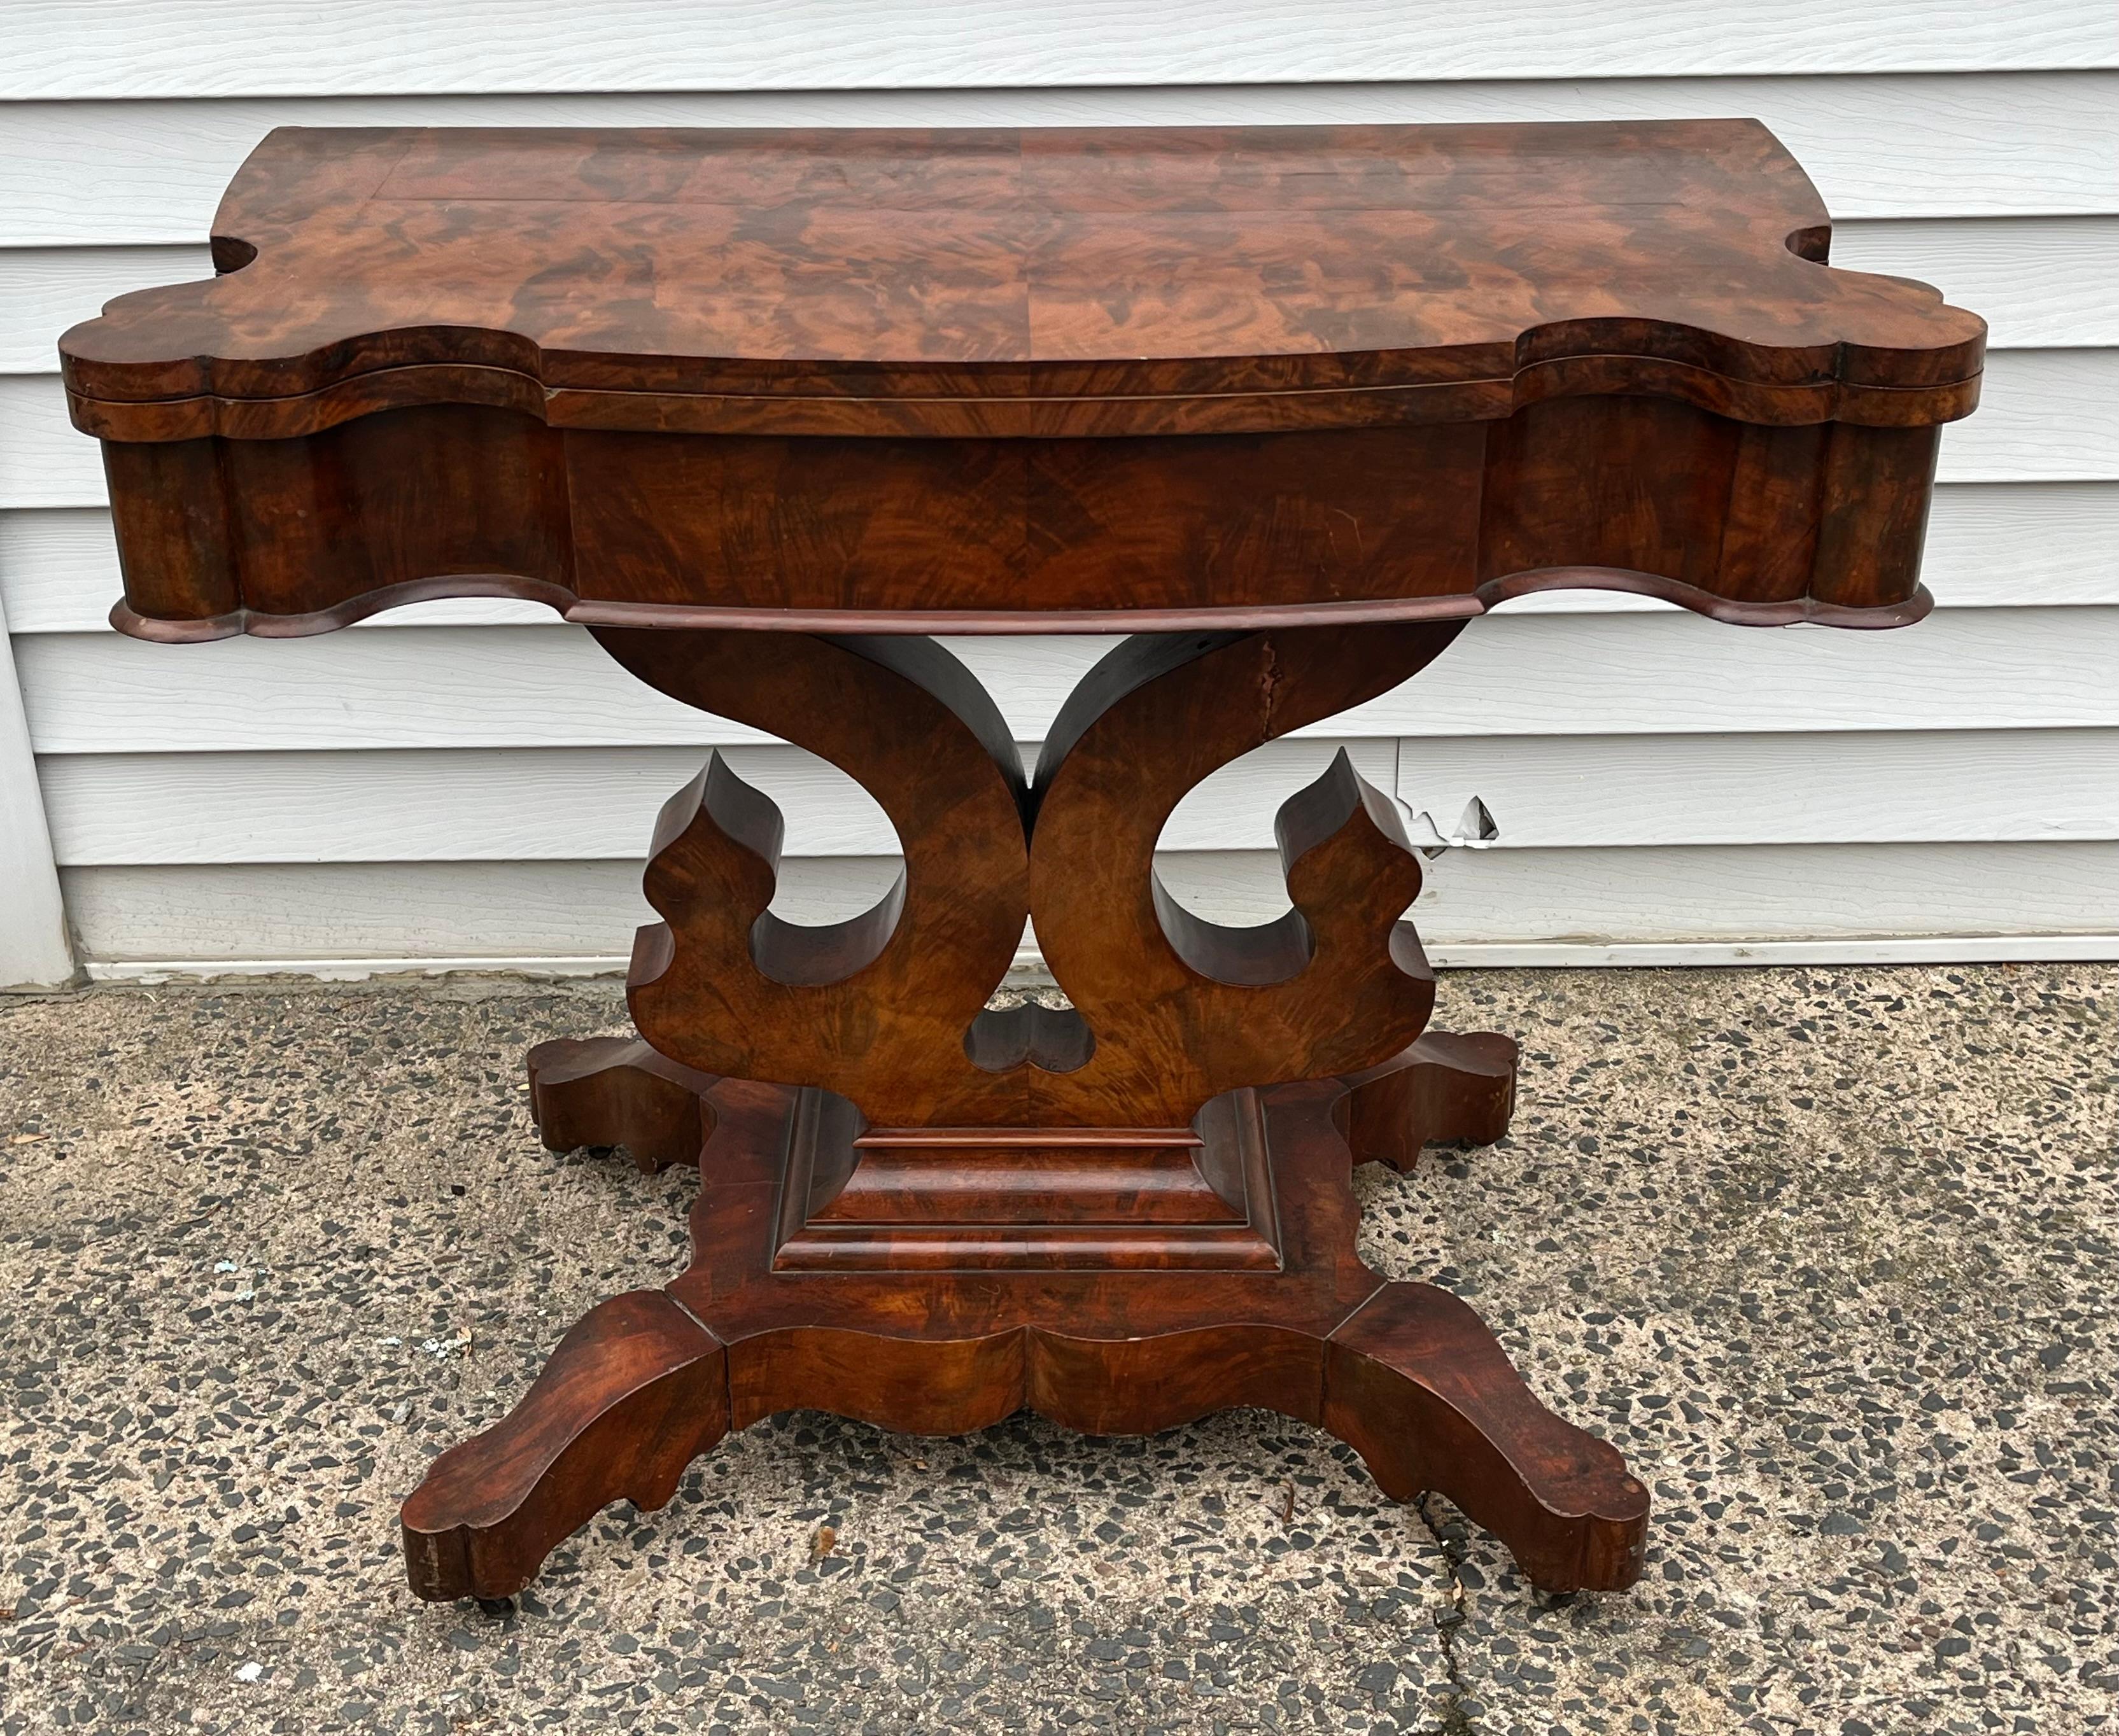 An American Empire flip-top console table in flame mahogany, circa 1870, with lyre base on plinth base with casters, converts to a 36” x 38” tea table. 